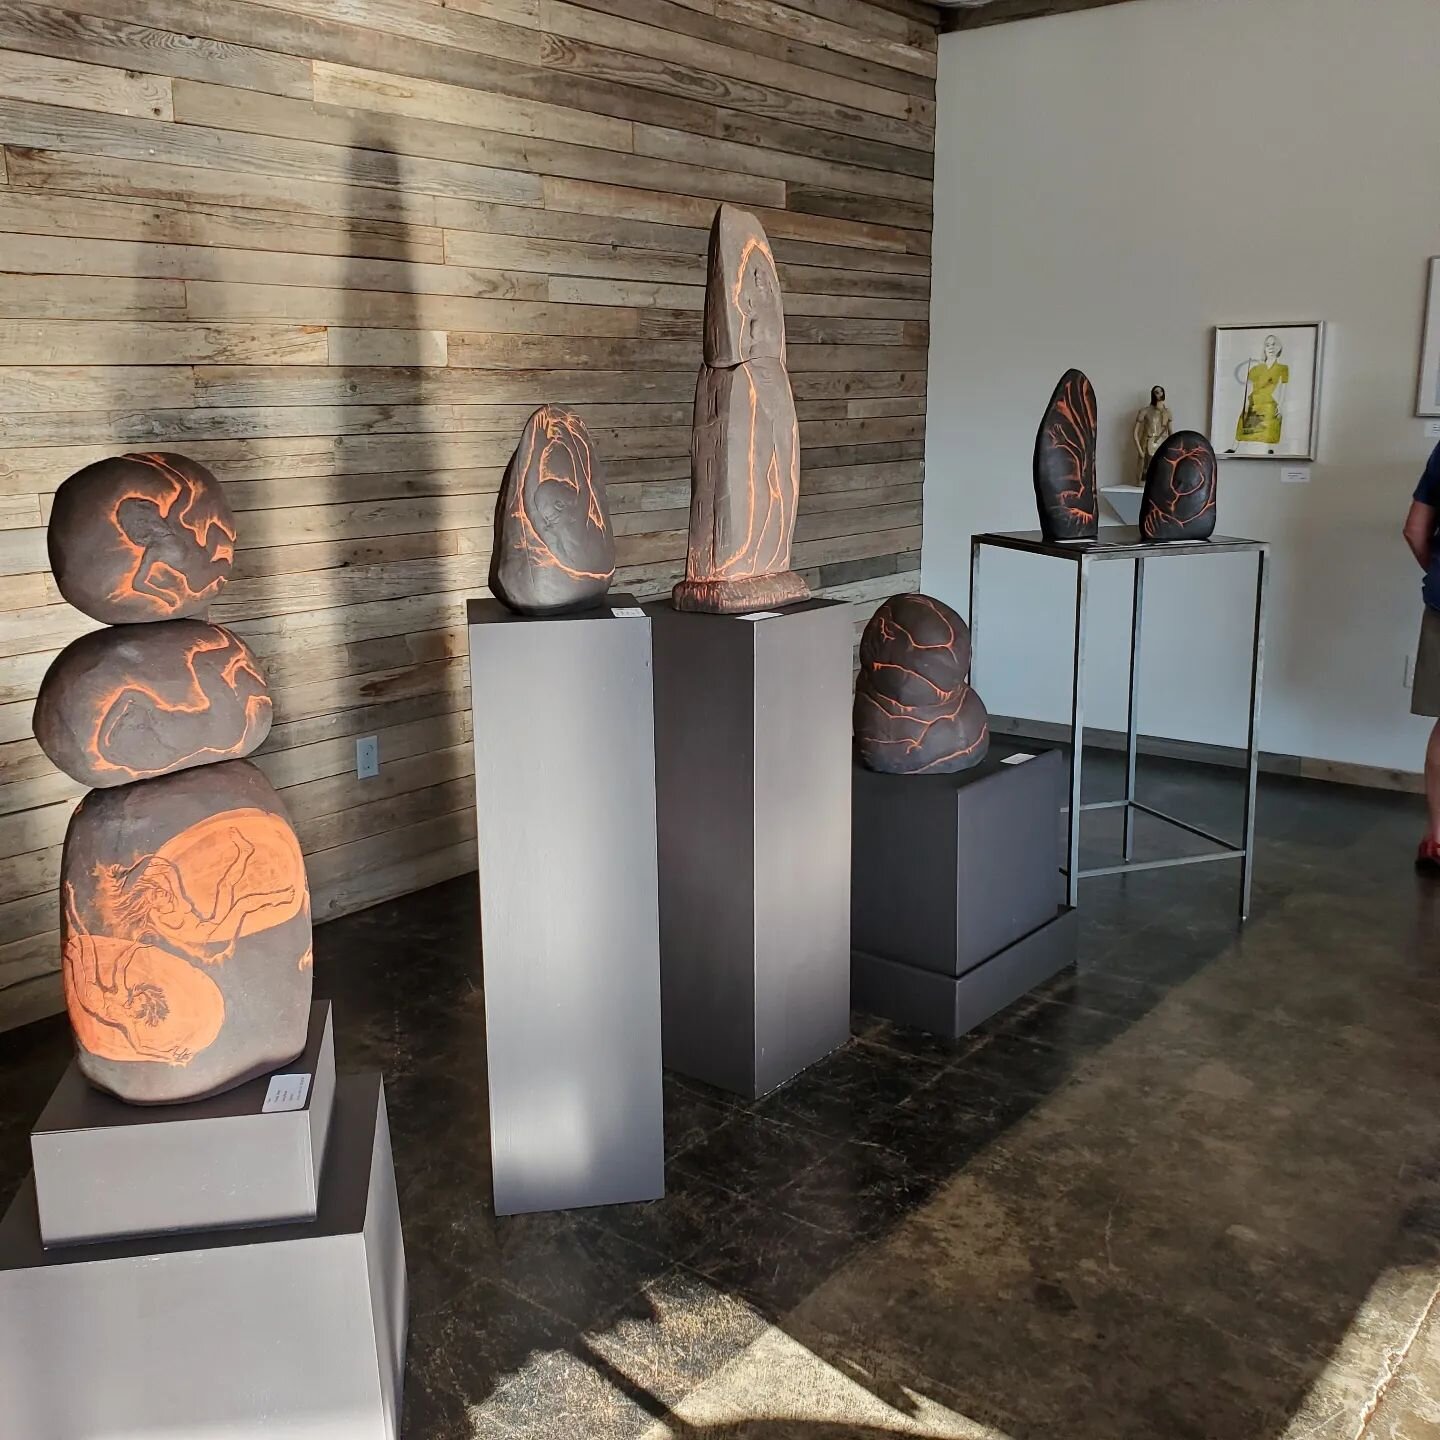 The summer evening light pouring onto my sculptures is lovely. The orange glows!

Made a last visit to Boxx Gallery and The Potter's Touch show. Thank you Boxx! It was a wonderful show with amazing local ceramic artists.

I loved having this time wit